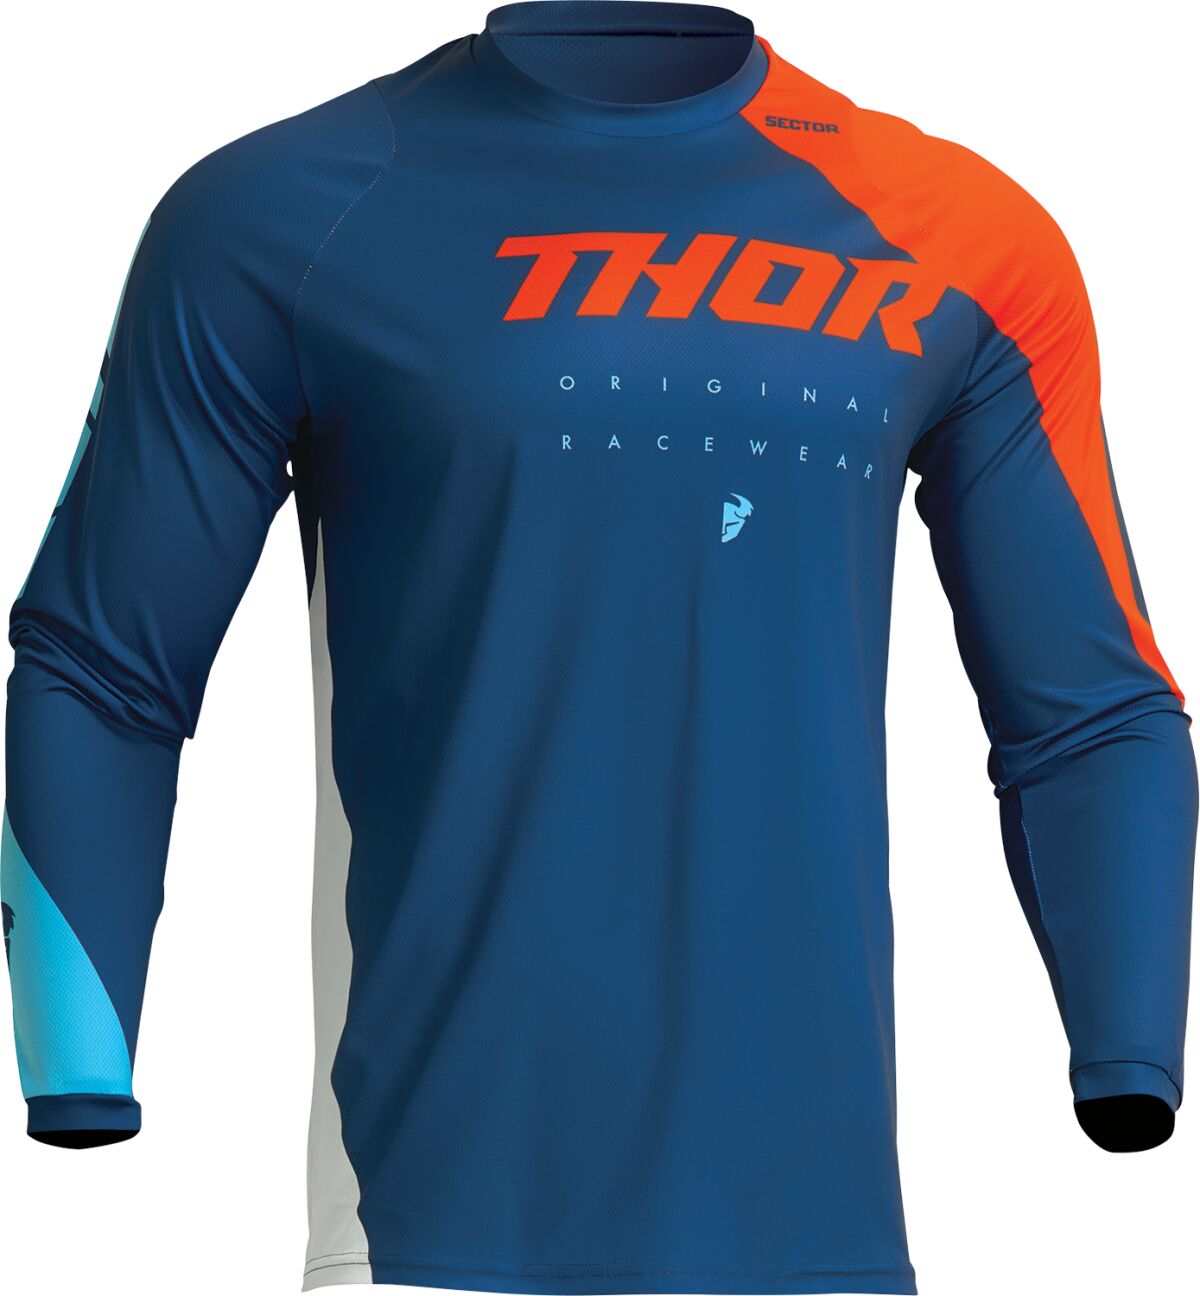 Sector Edge Jersey